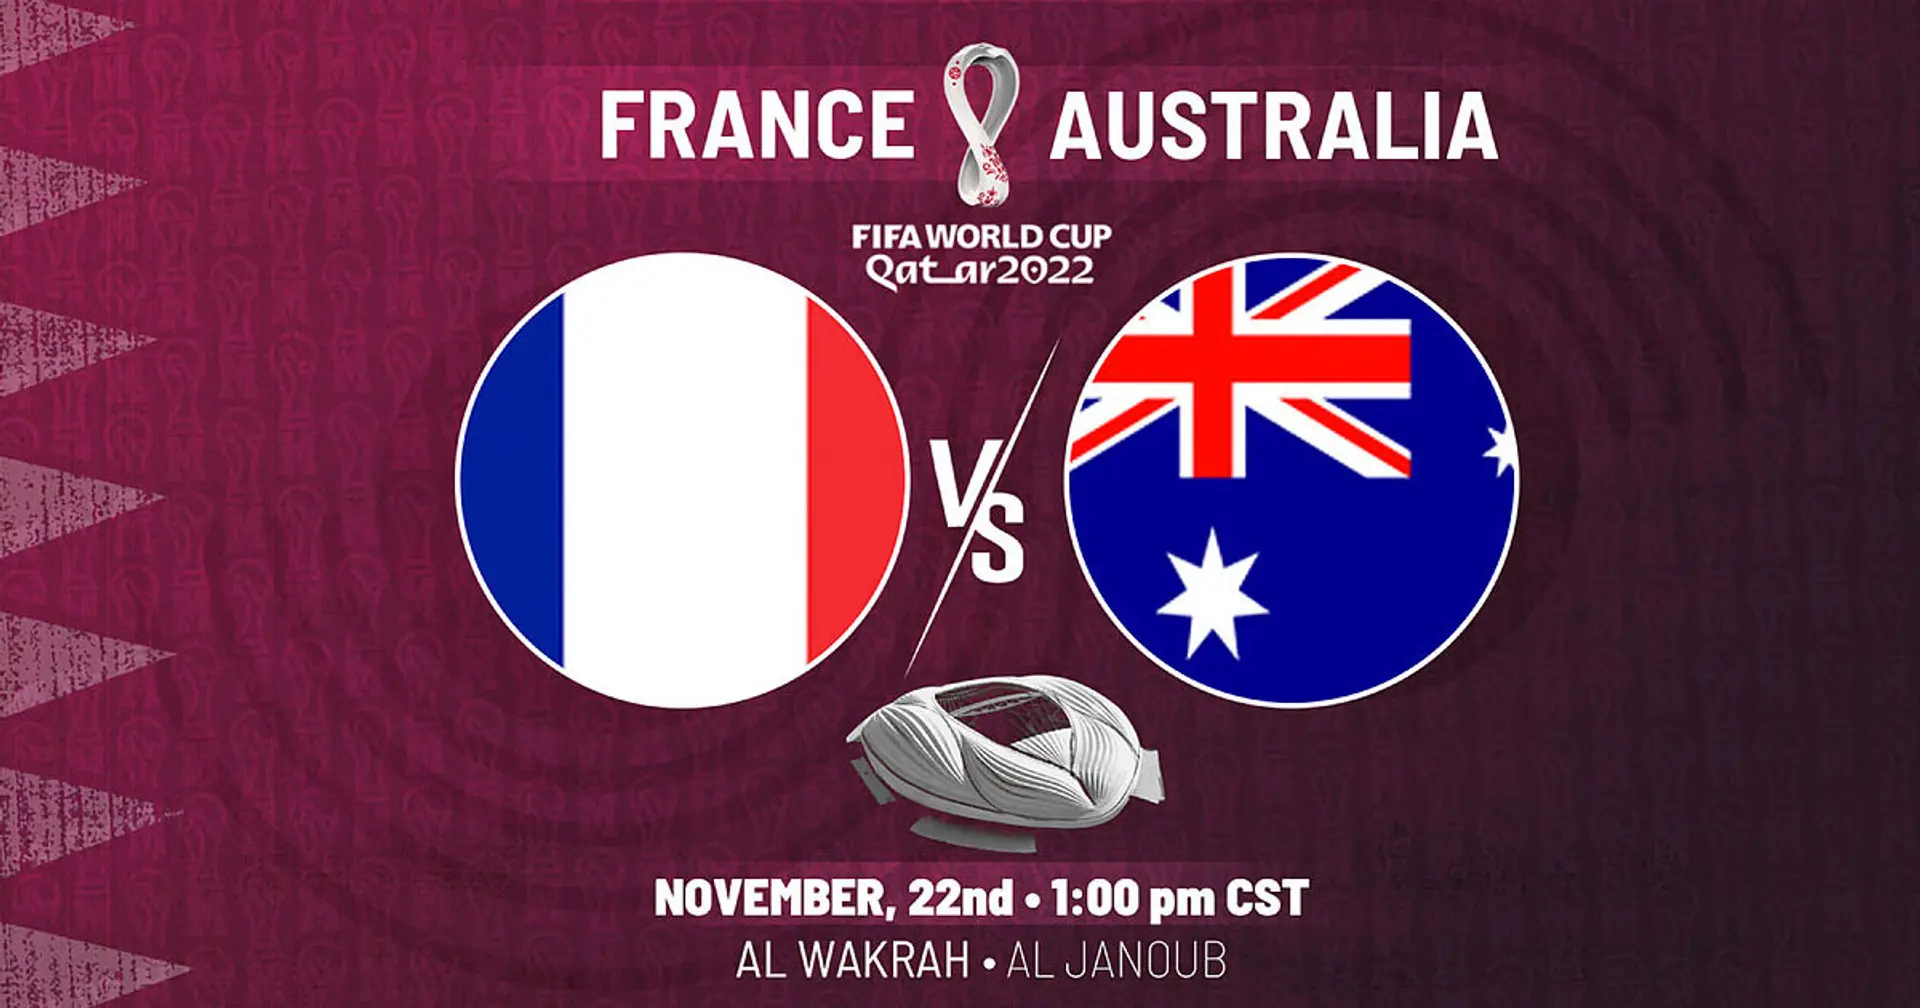 France vs Australia: Official team lineups for the World Cup clash announced